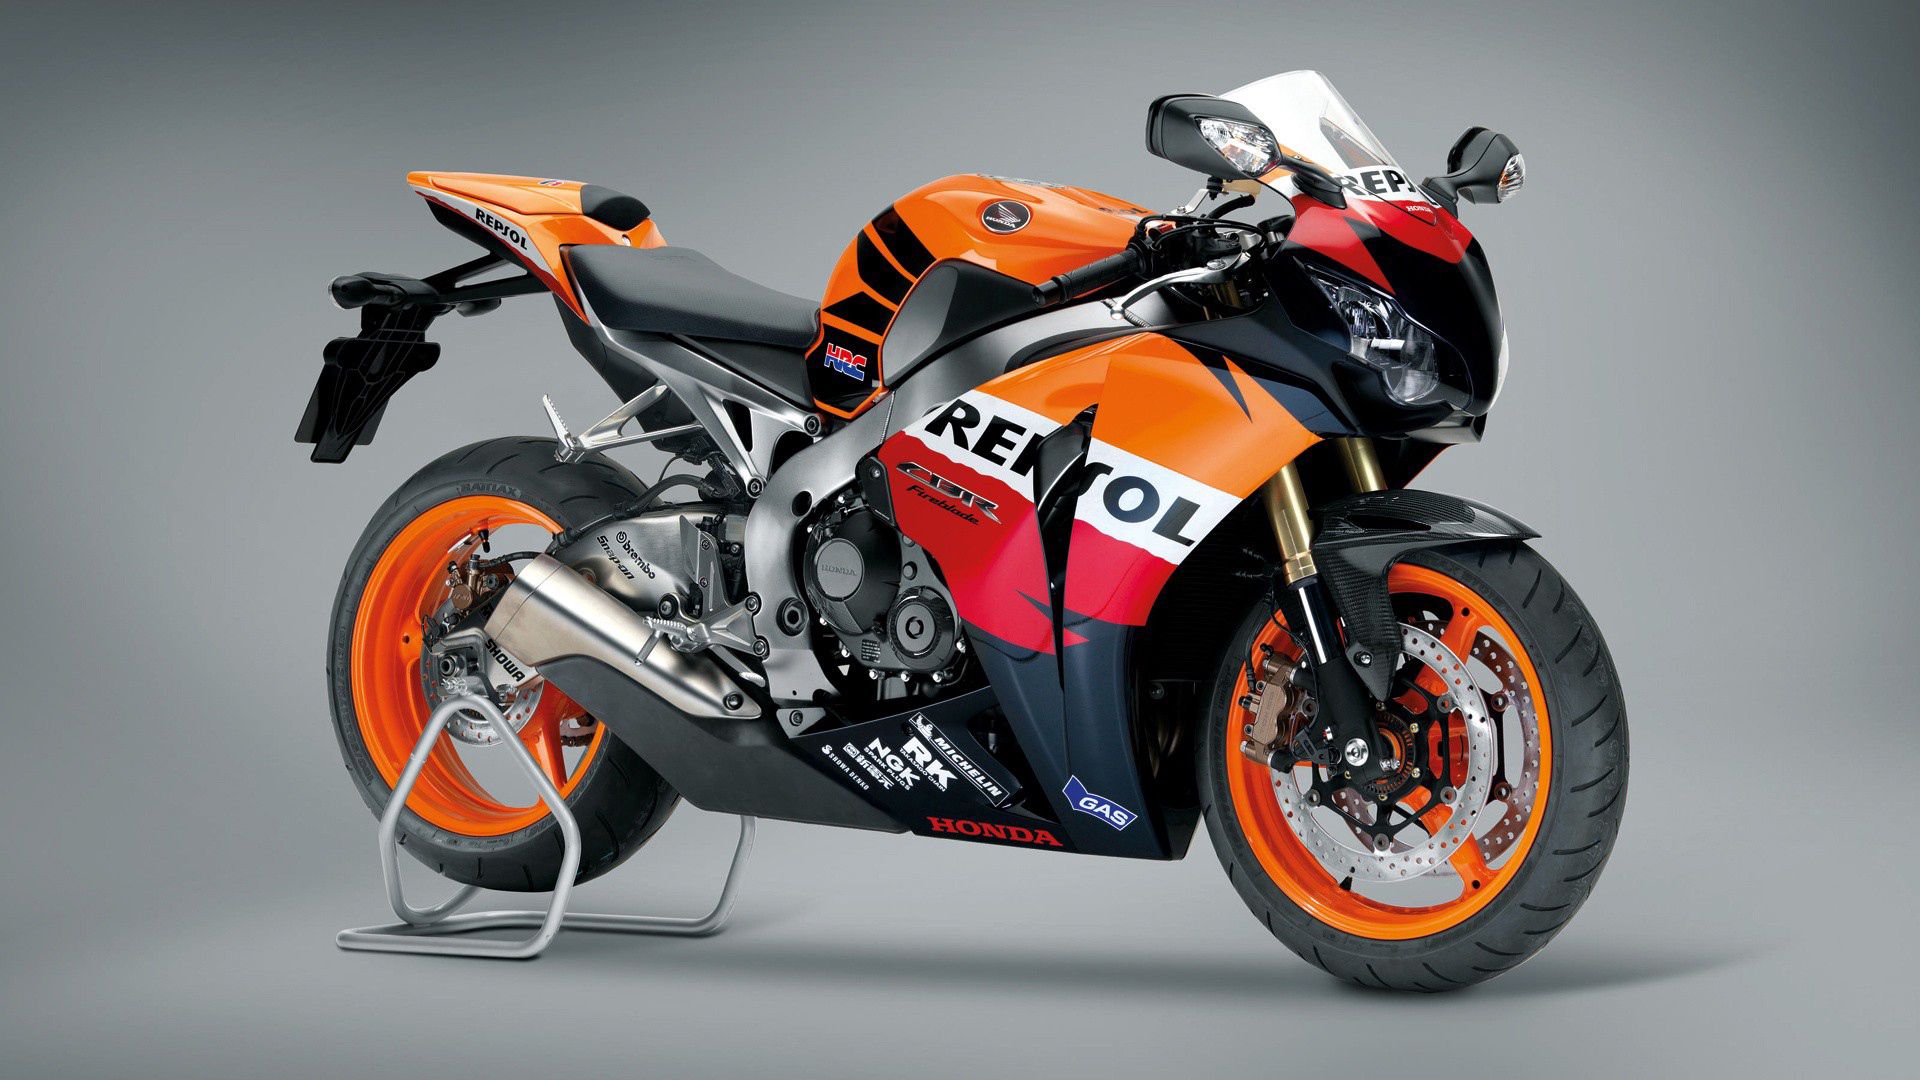 iPhone background motorcycle, repsol, side view, motorcycles